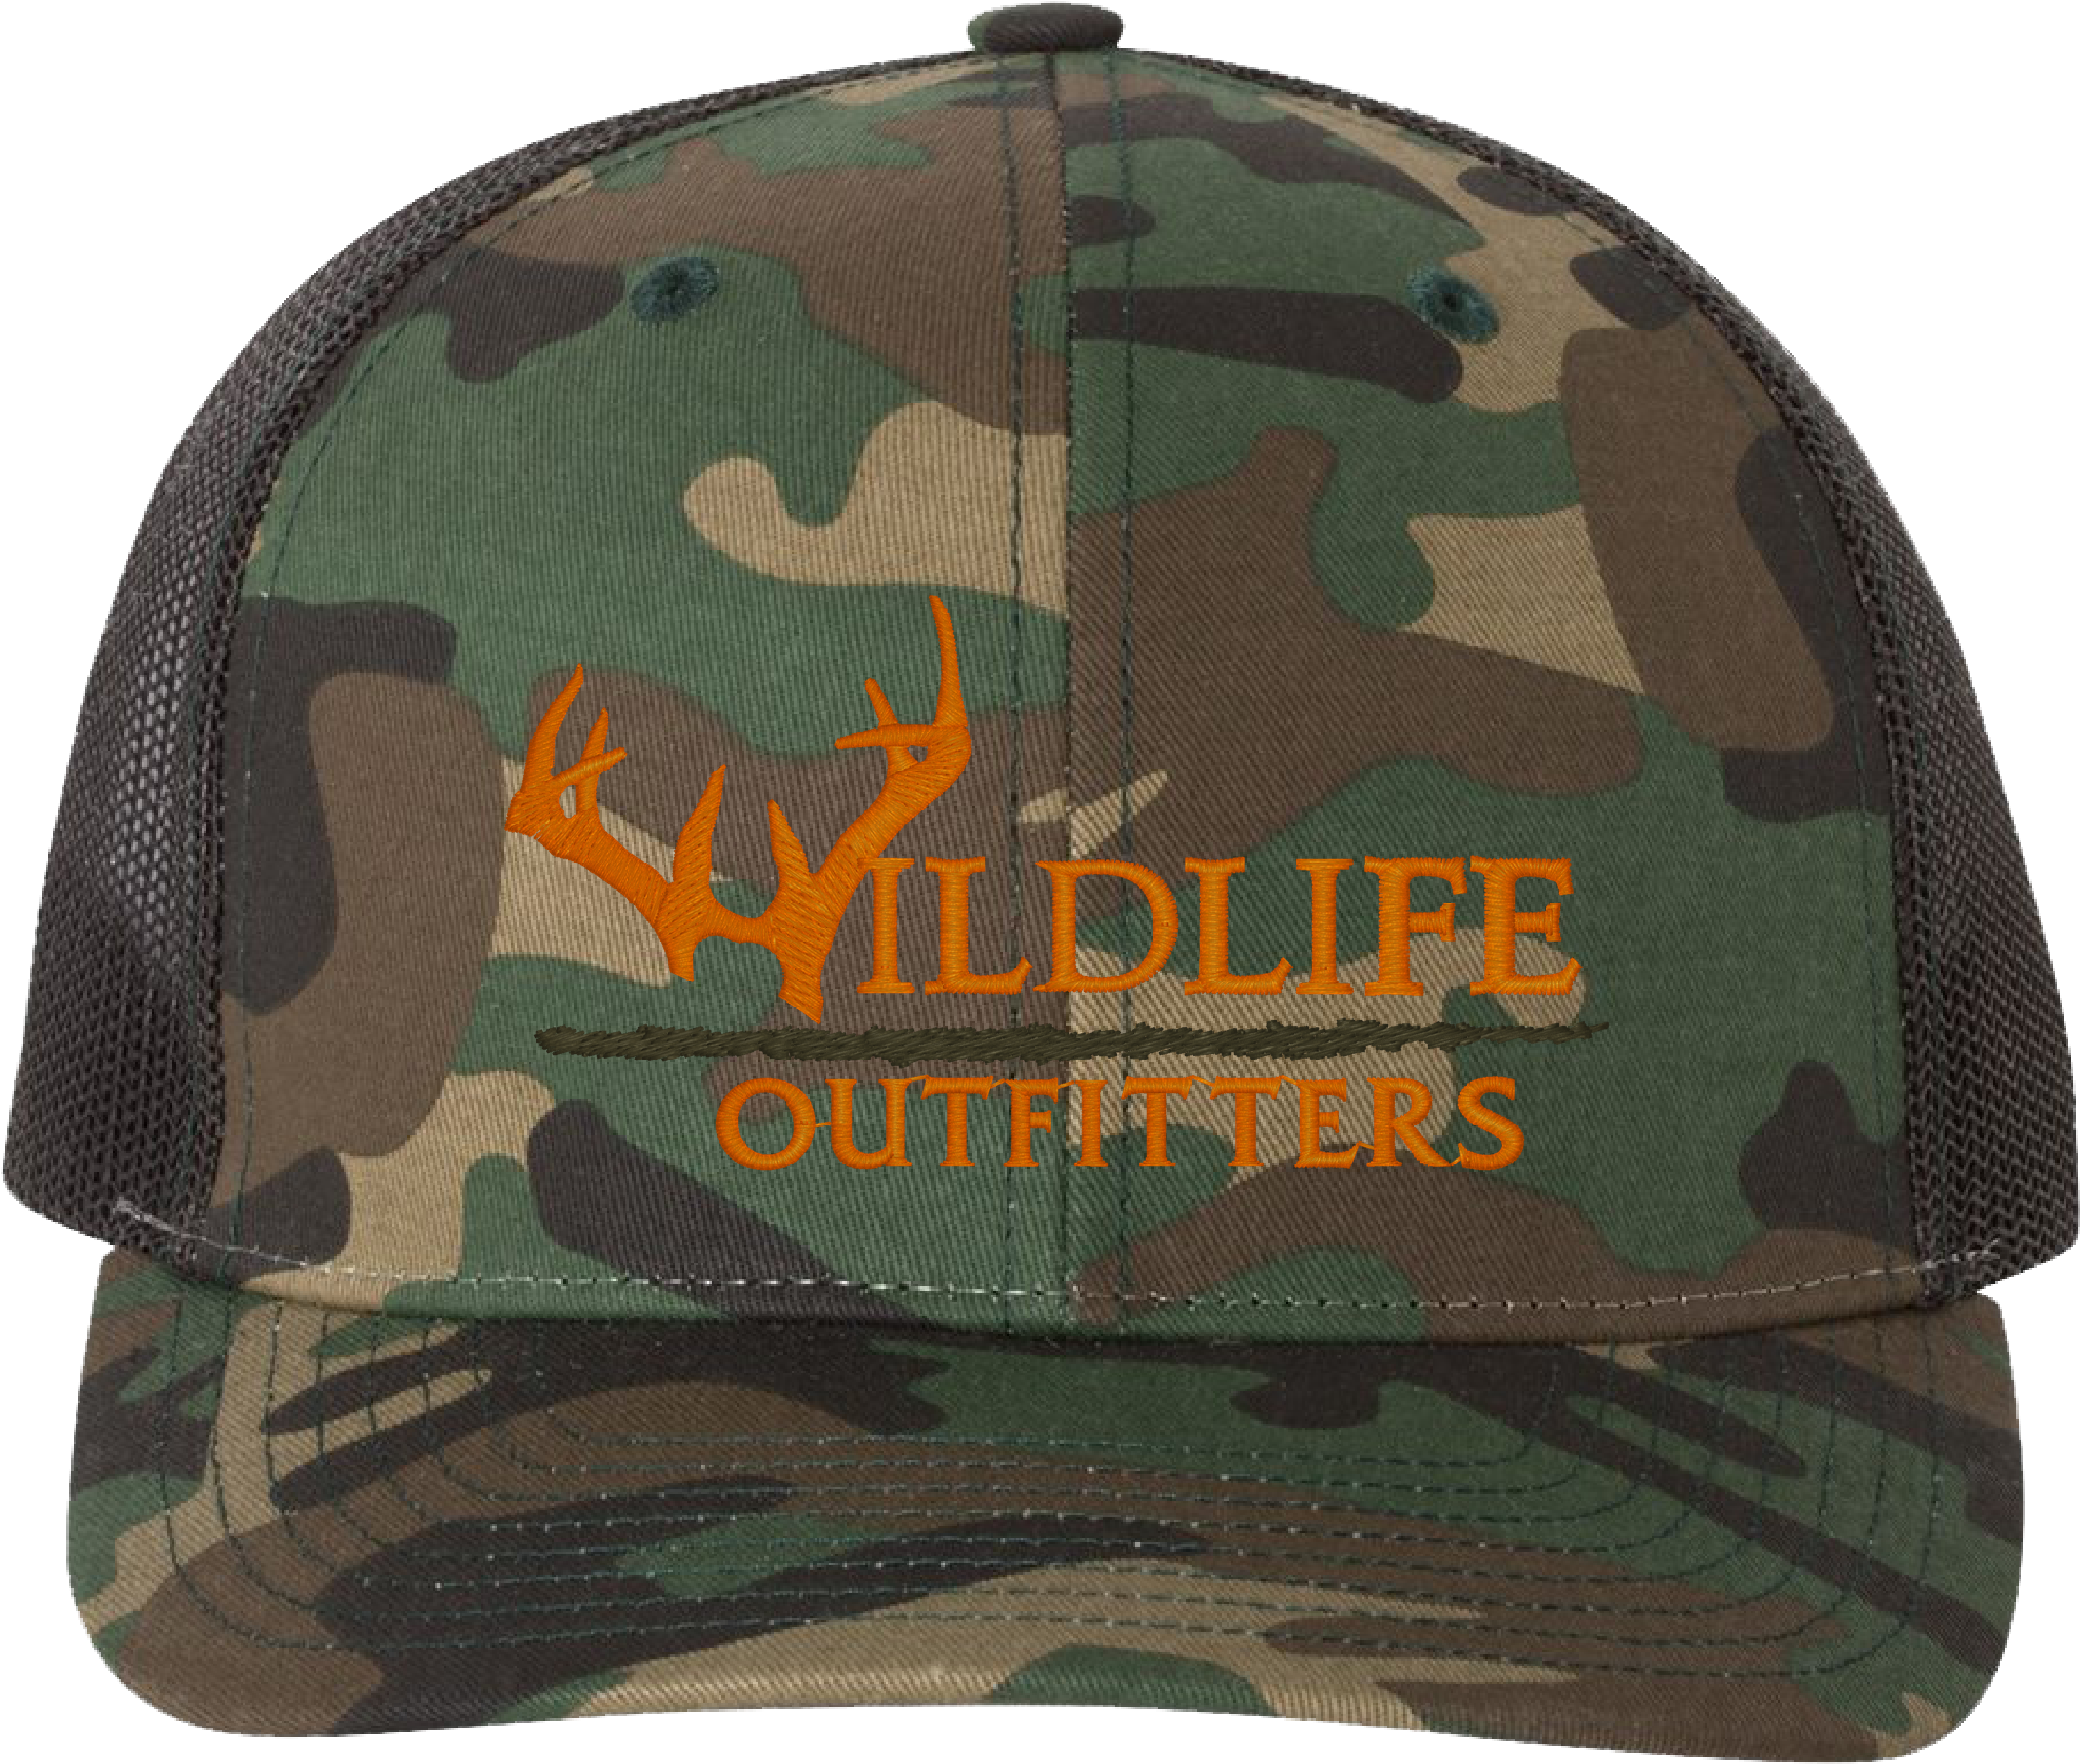 Hat Camo Army HD Image Free PNG Image